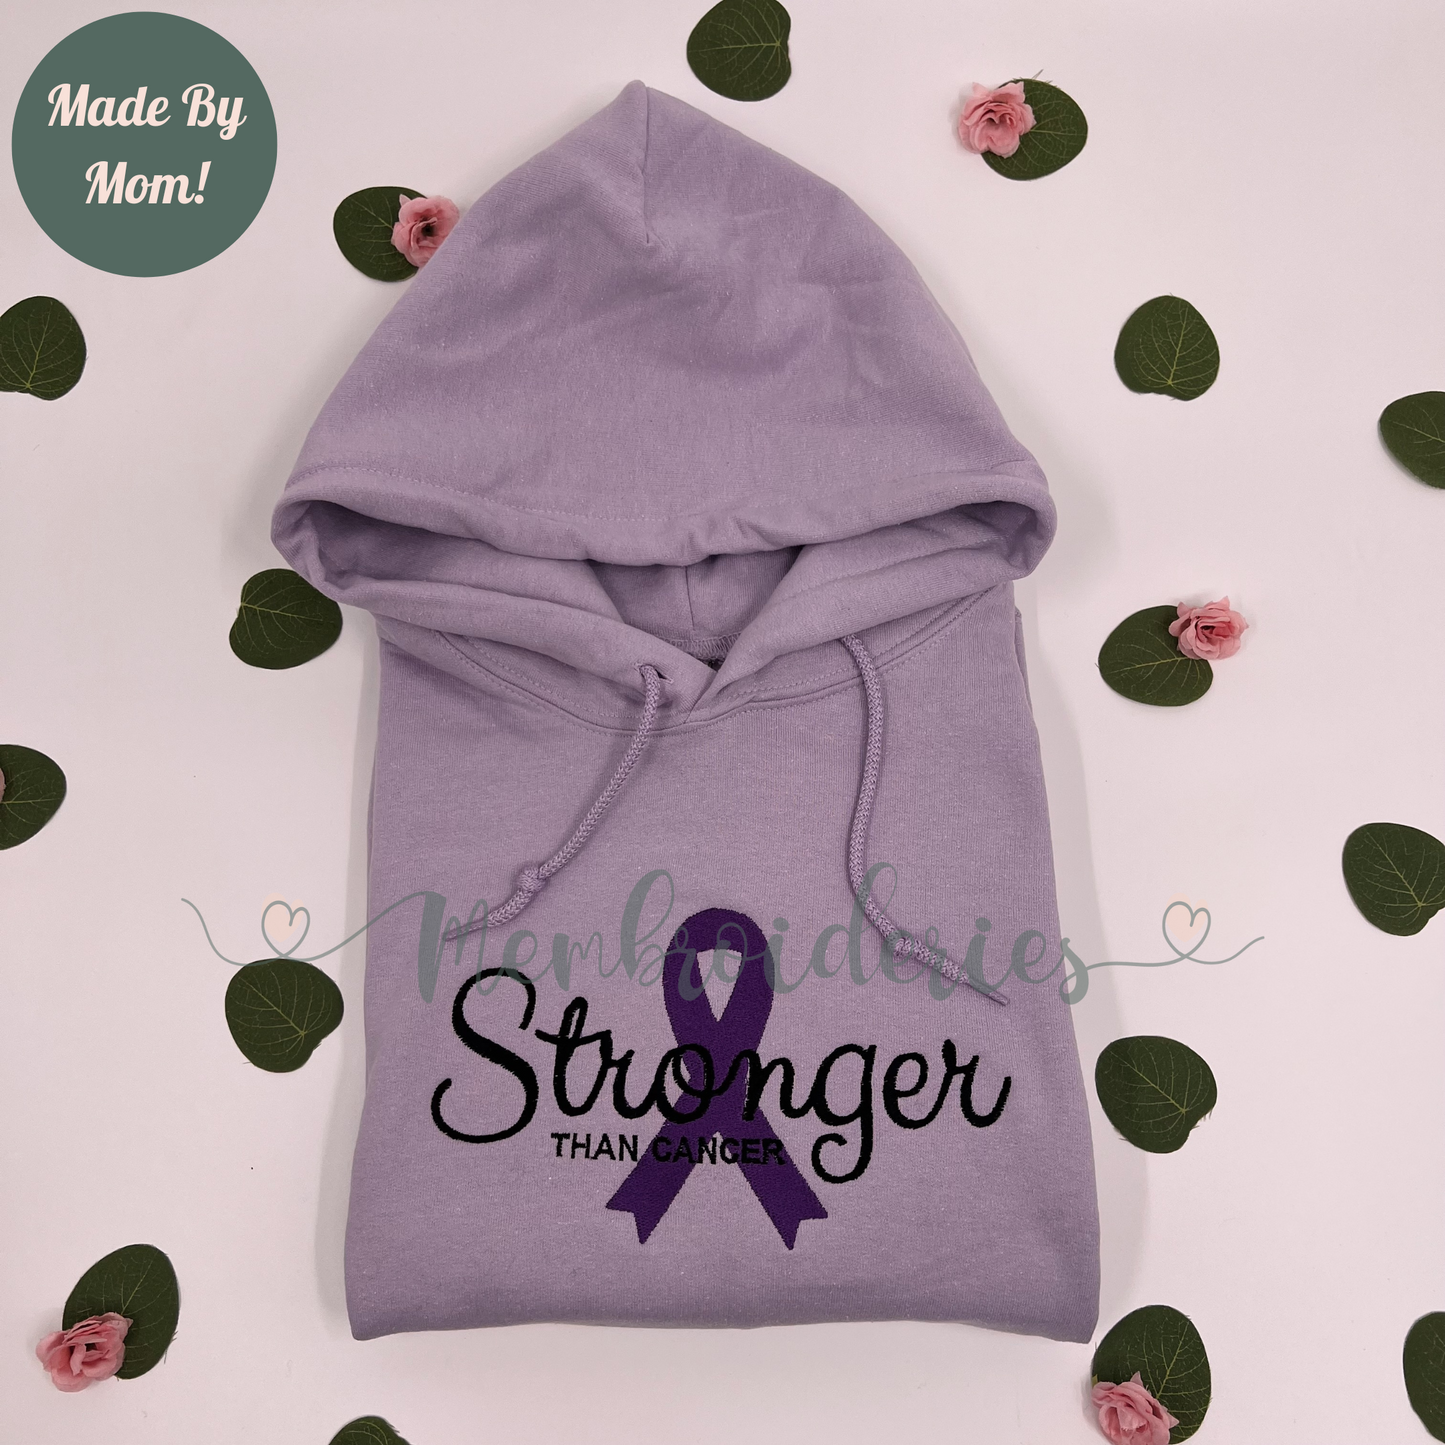 Stronger Than Cancer Embroidered Hoodie or Sweatshirt